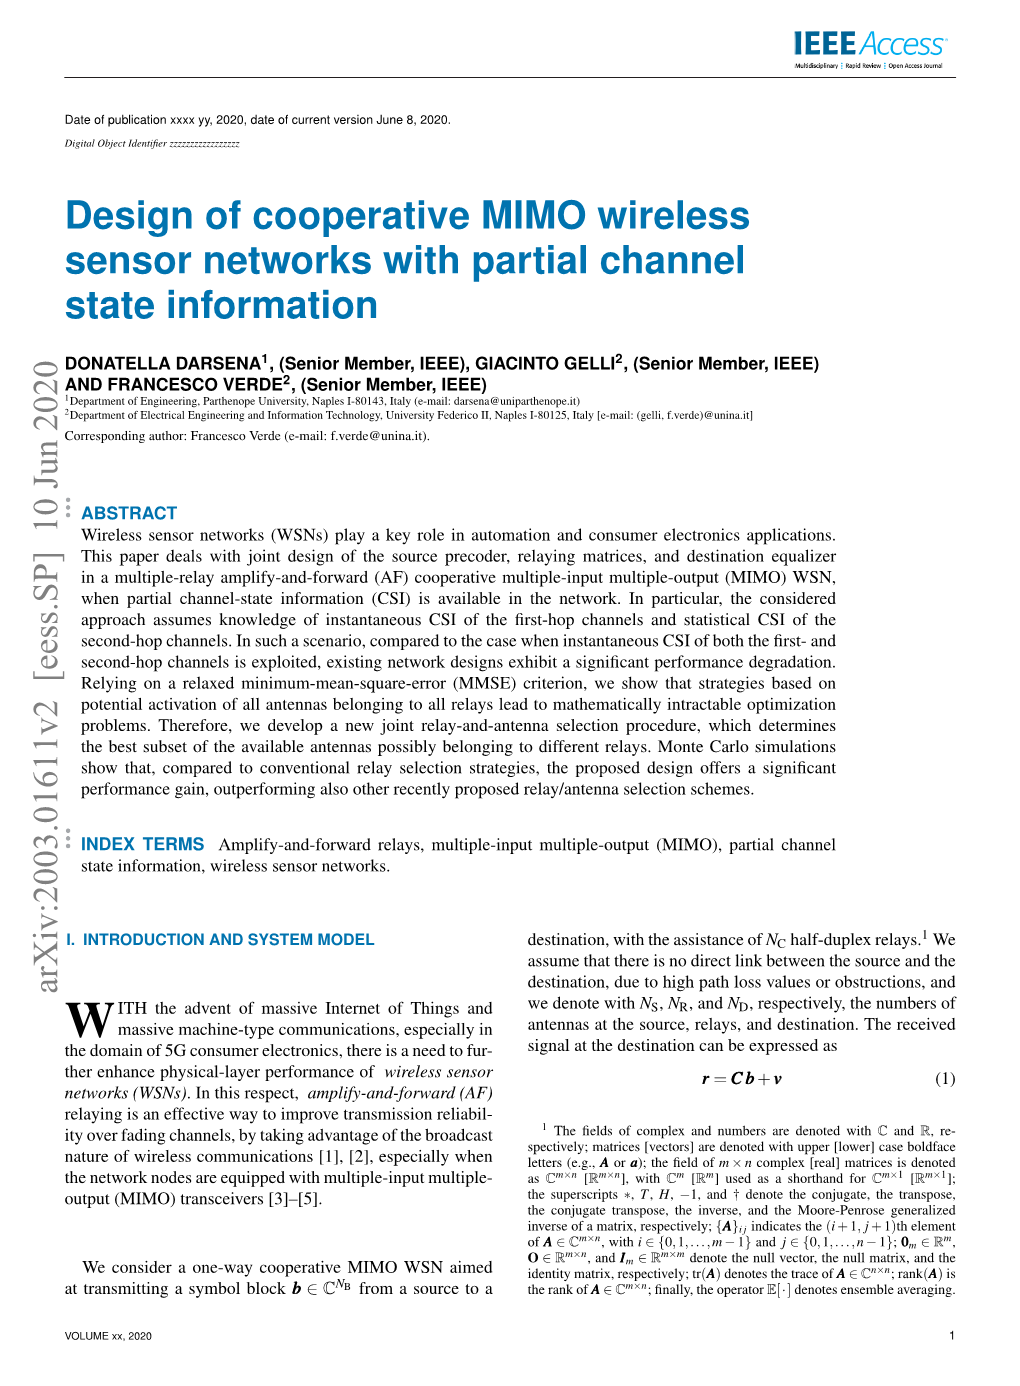 Design of Cooperative MIMO Wireless Sensor Networks with Partial Channel State Information